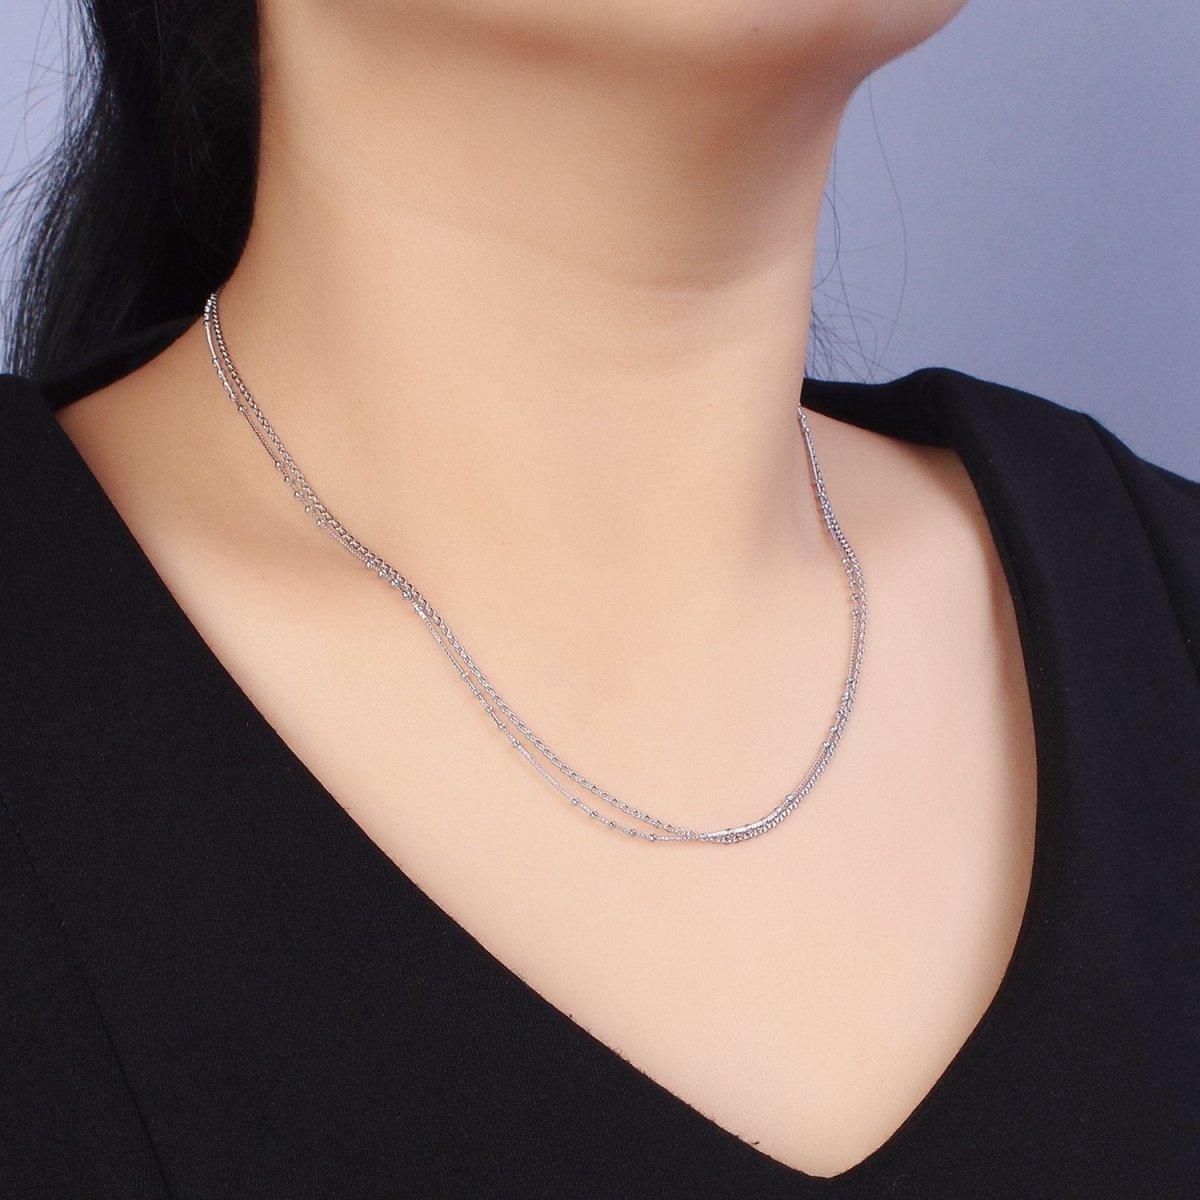 Double Layer Silver Necklace Set Two Strand Chain Multi Strand Necklace Satellite Chain and Cable Link Chain Necklace For Minimalist | WA-1606 Clearance Pricing - DLUXCA